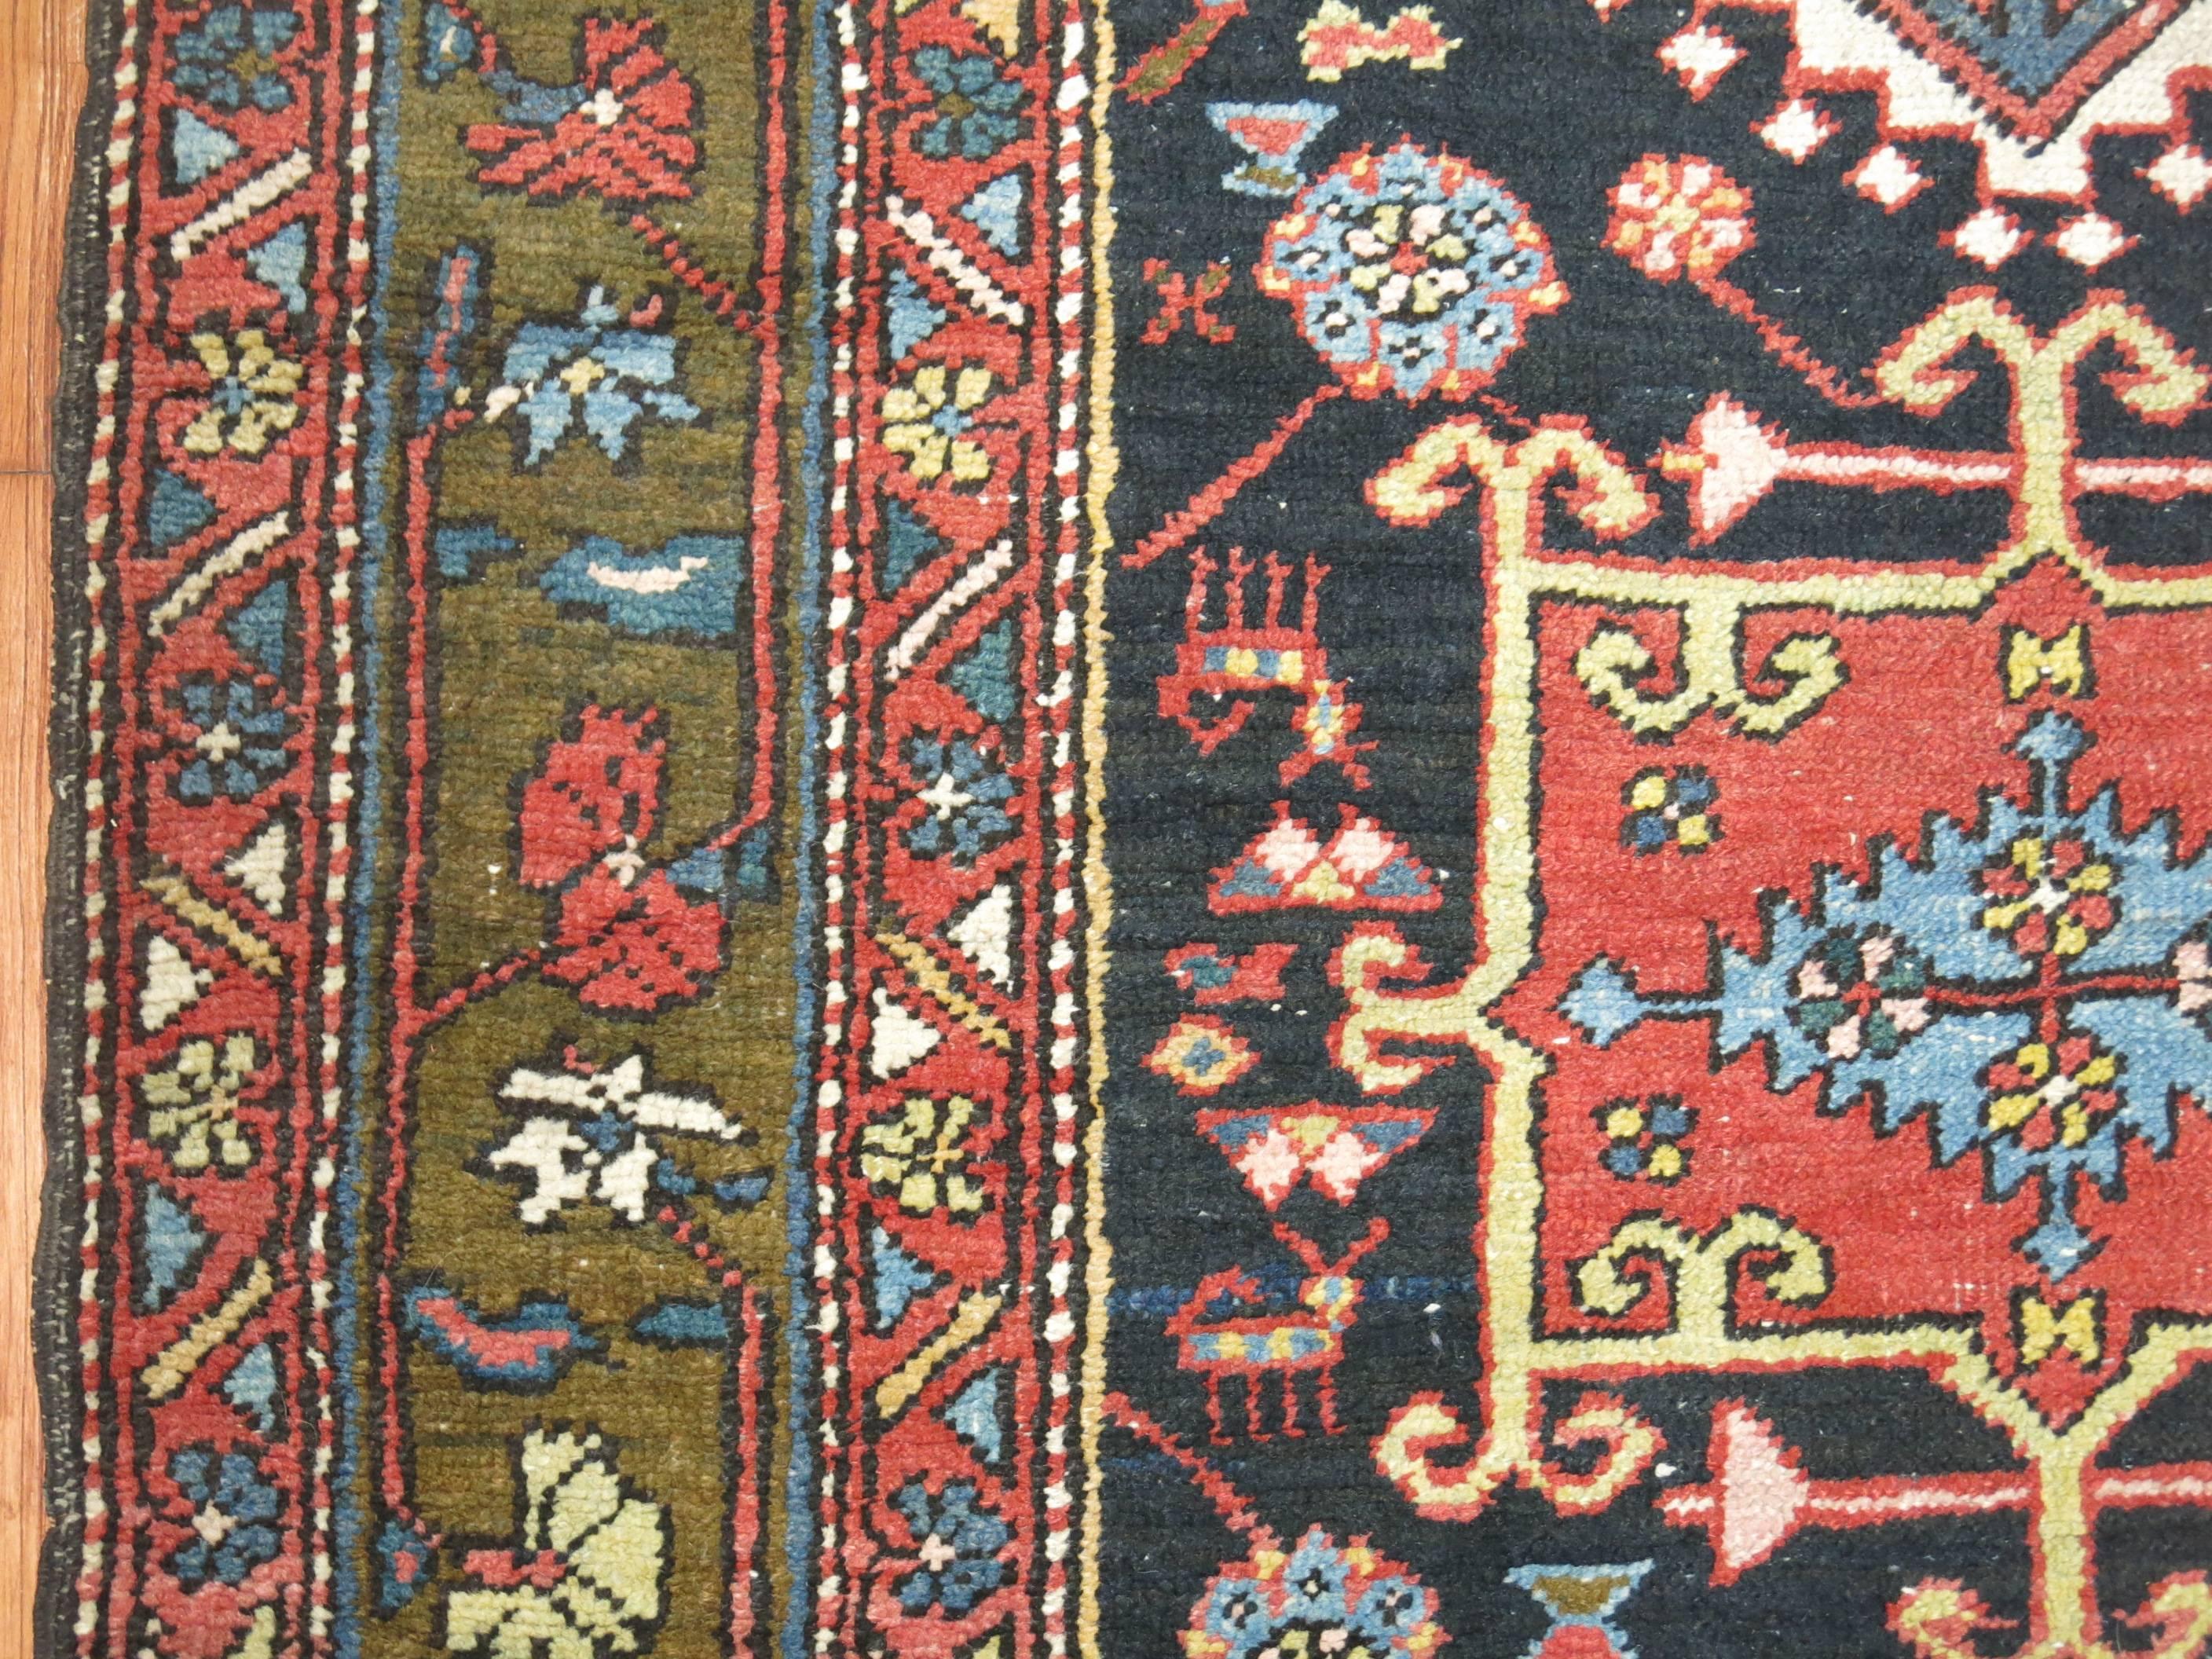 A rare Persian Heriz runner with a colorful all-over design.